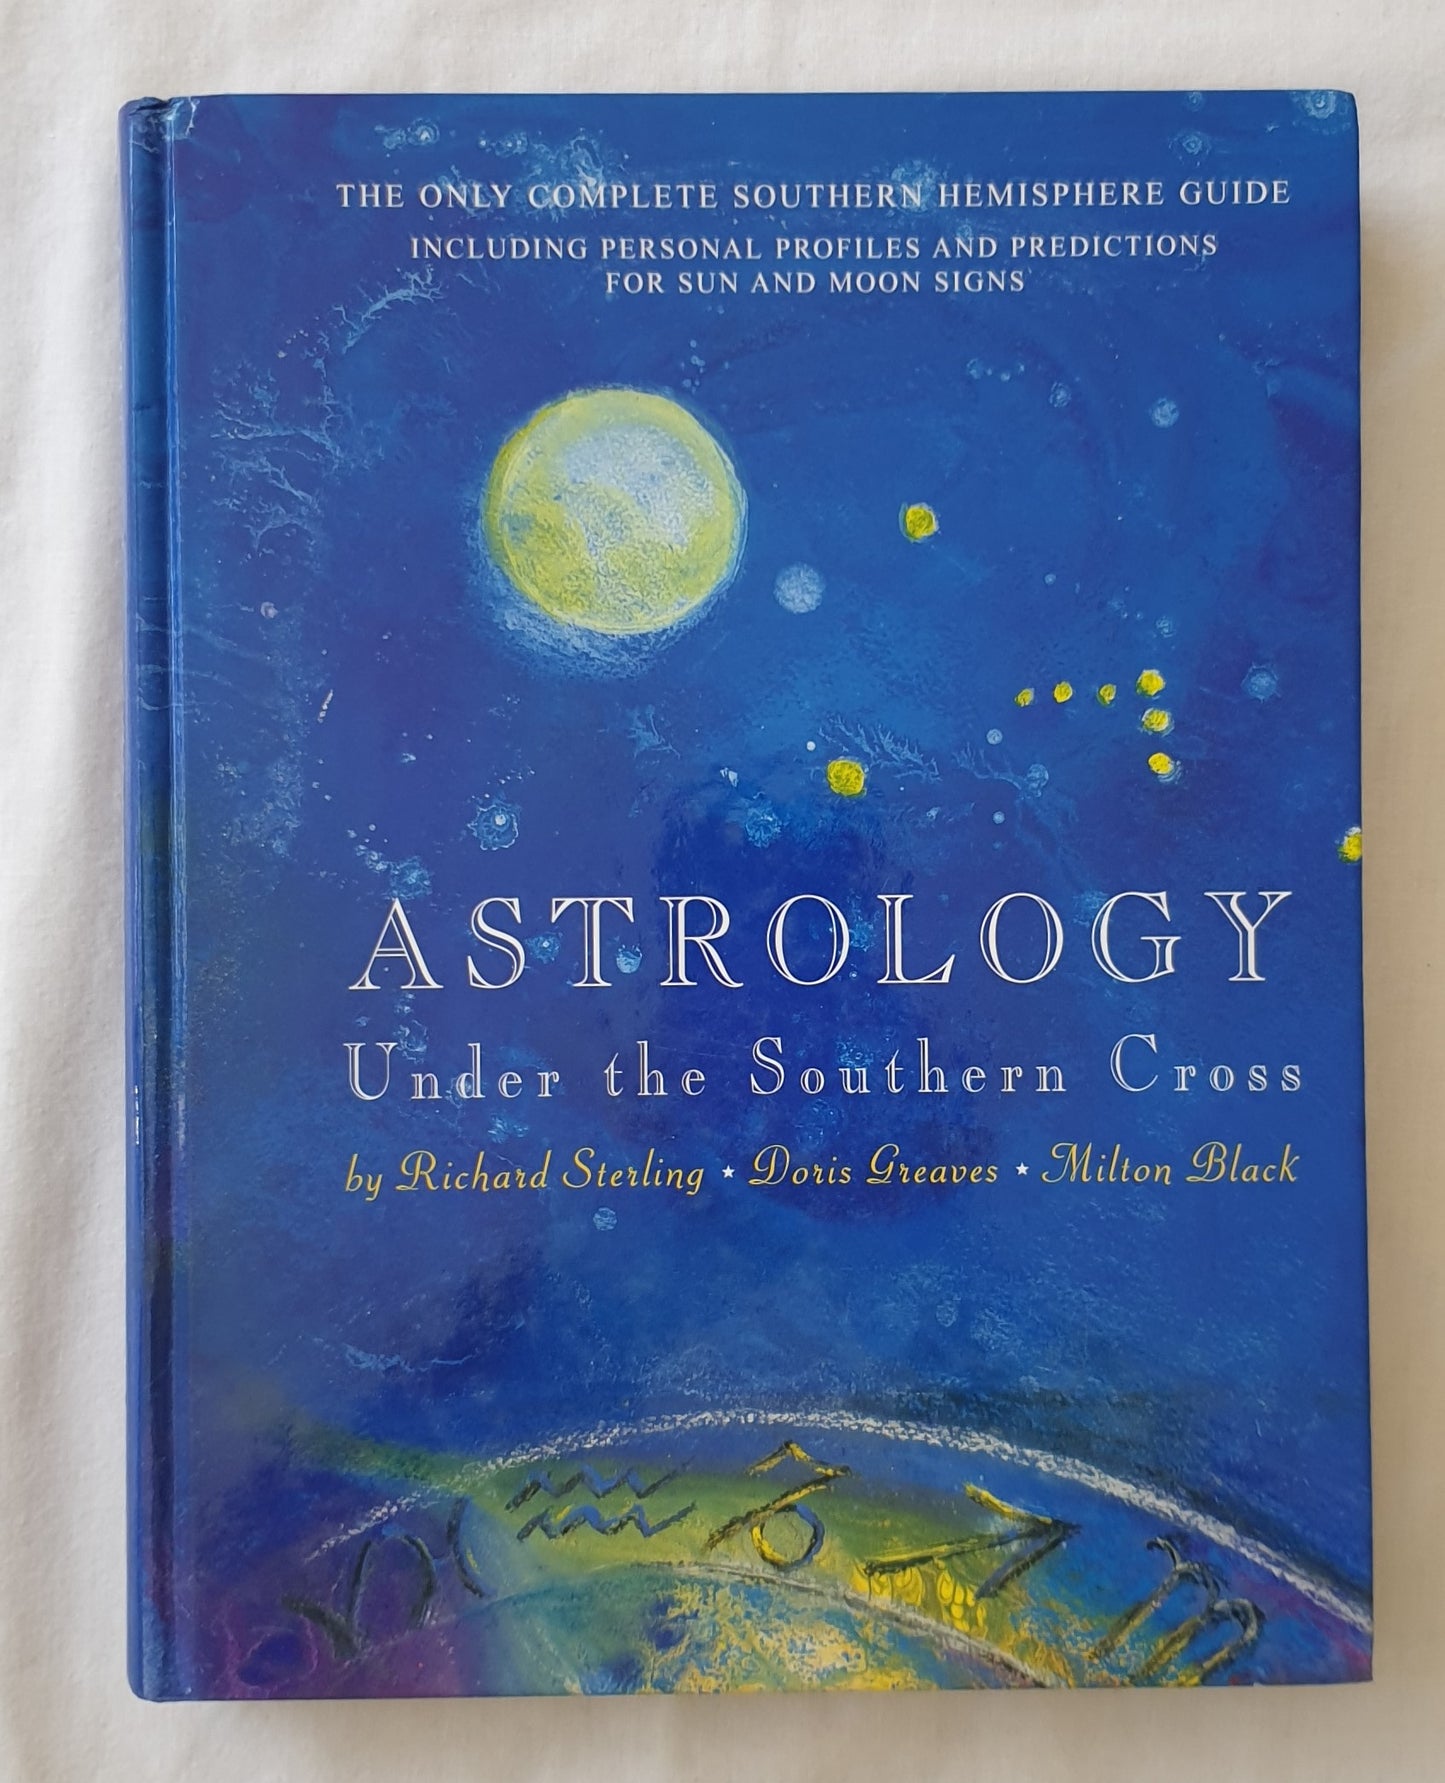 Astrology Under the Southern Cross by Richard Sterling, Doris Greaves and Milton Black